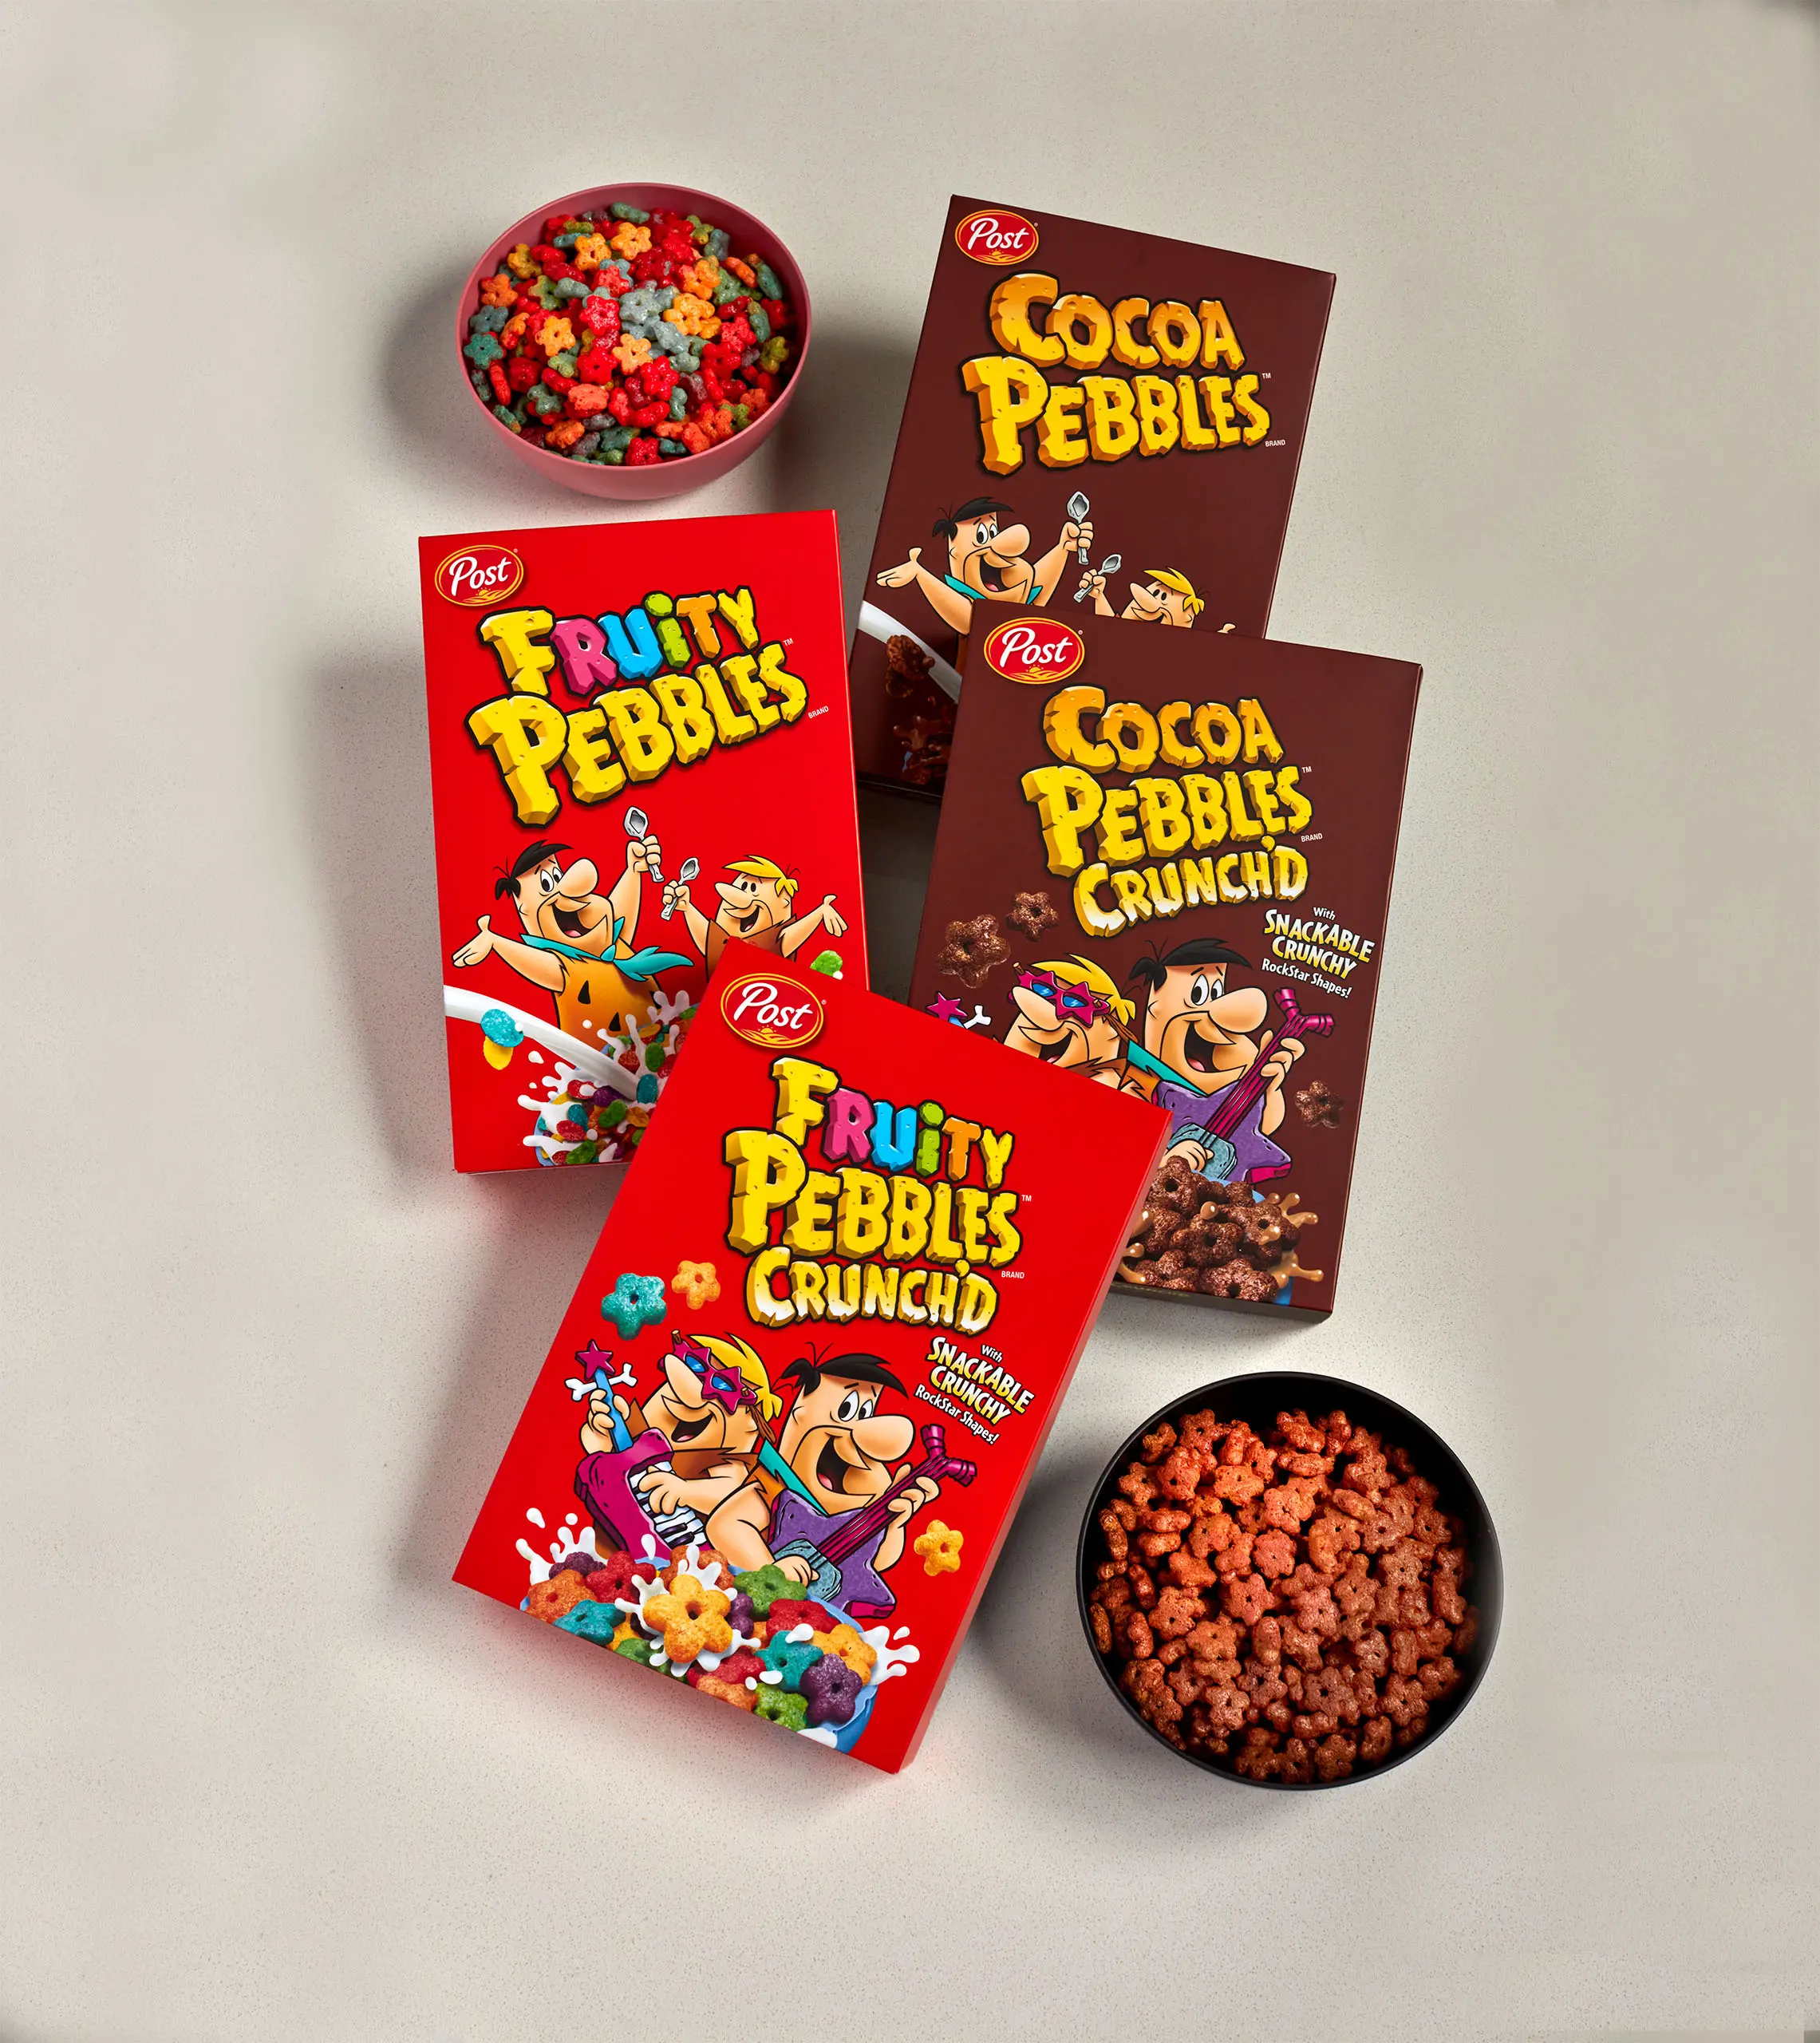 A top down view of boxes of FRUITY PEBBLES and COCOA PEBBLES CRUNCH'D. There are bowls of the cereals on the top left and bottom right.